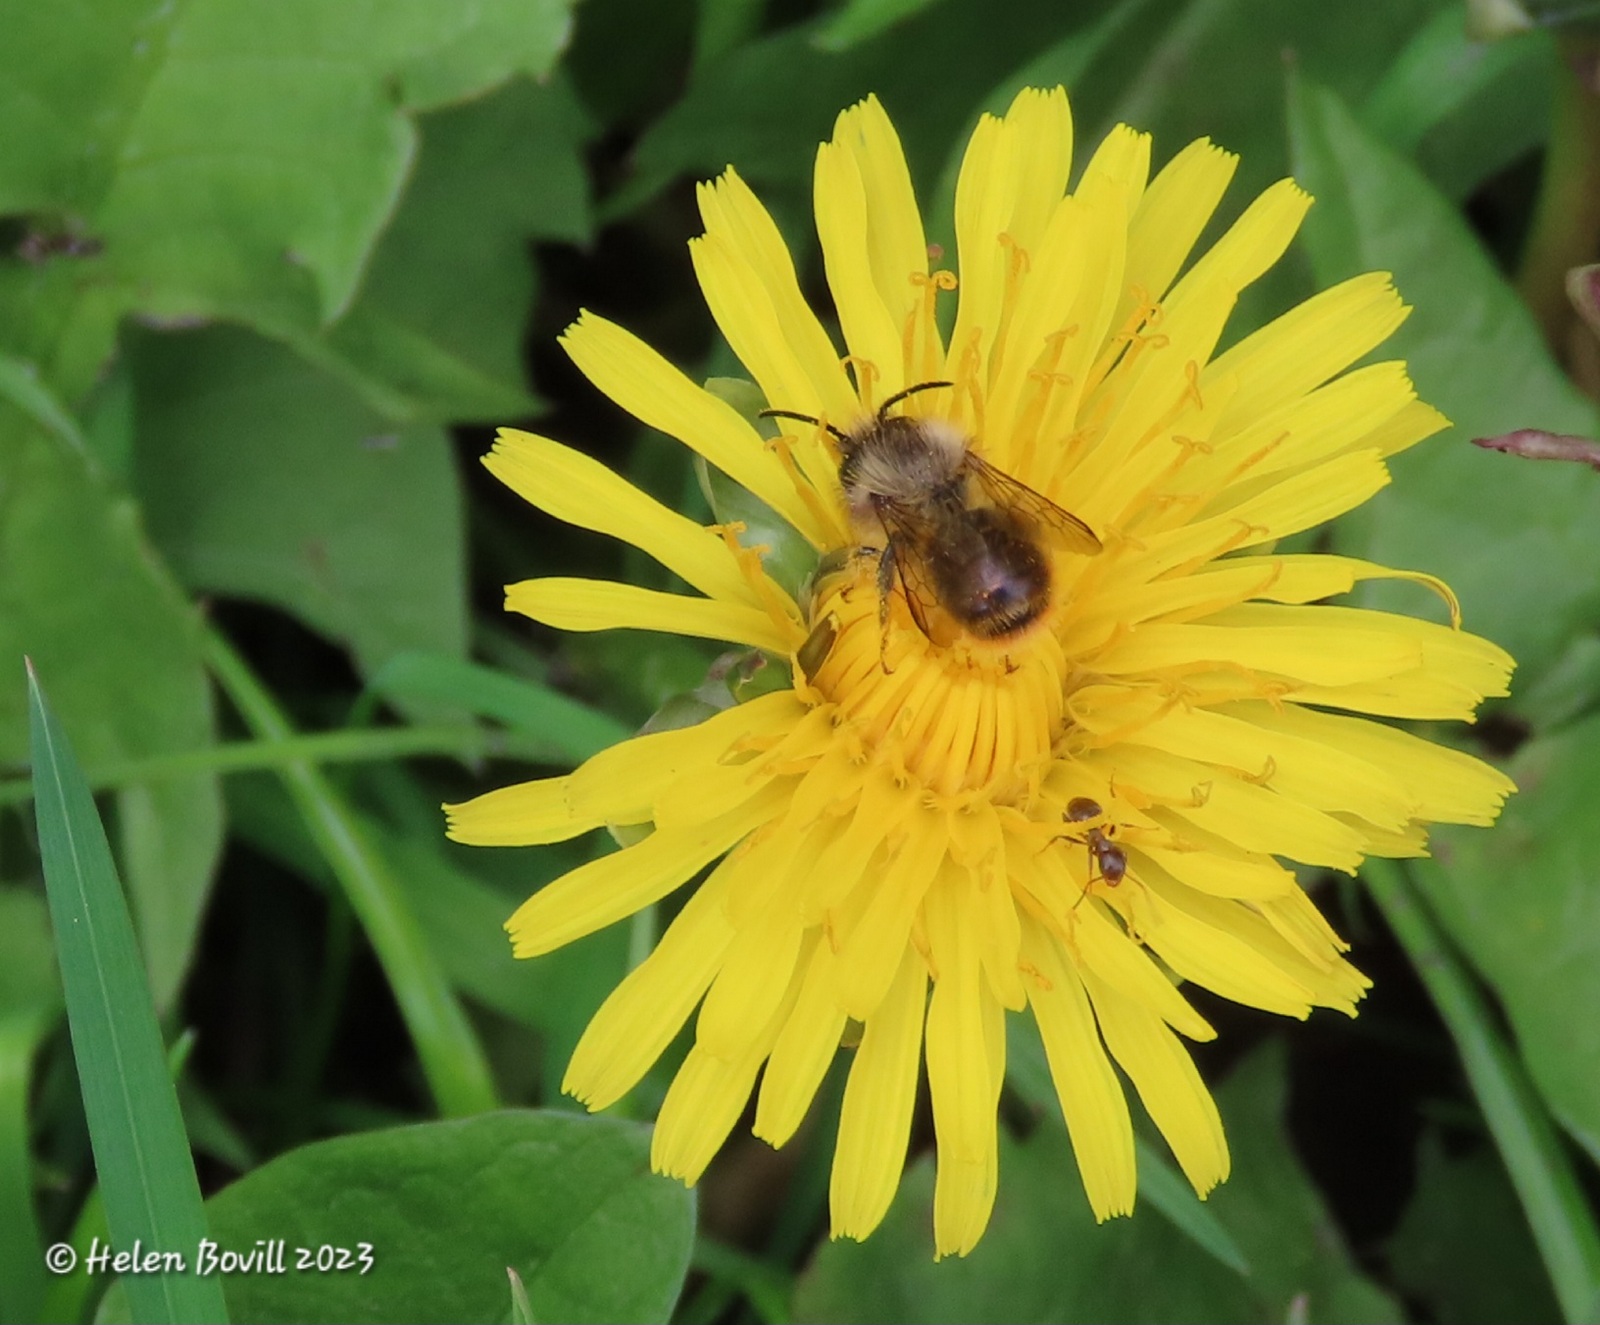 A Red Mason Bee on a Dandelion